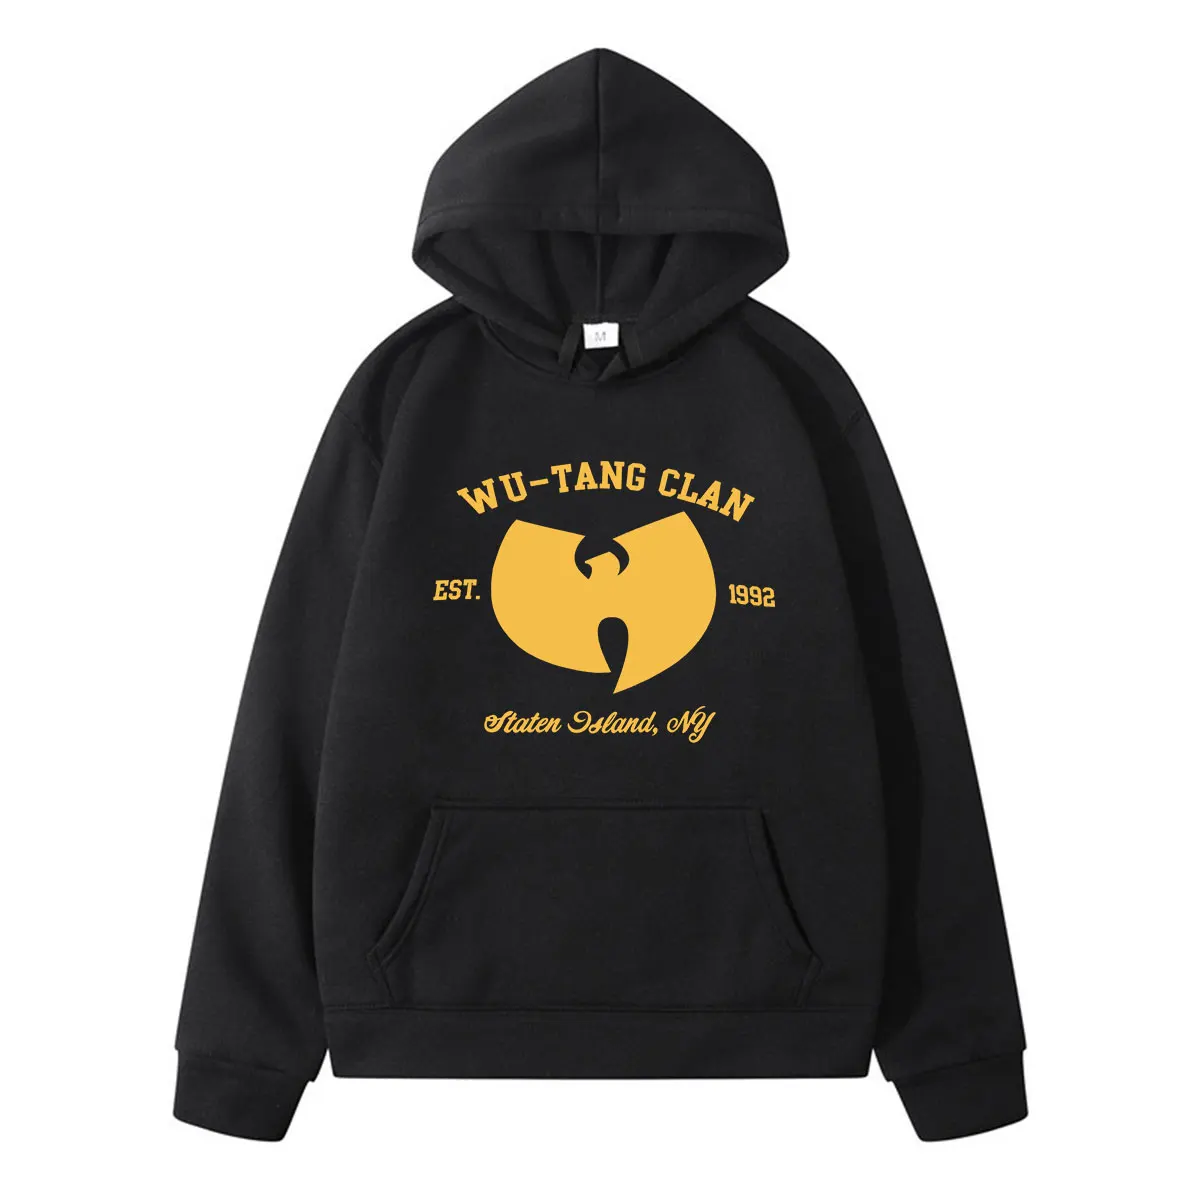 

New Style Hoodies Wu-Tang Clan Print Hot Sale Couple Clothes Four Seasons Sweatshirt Loose Casual Cotton High Quality Streetwear